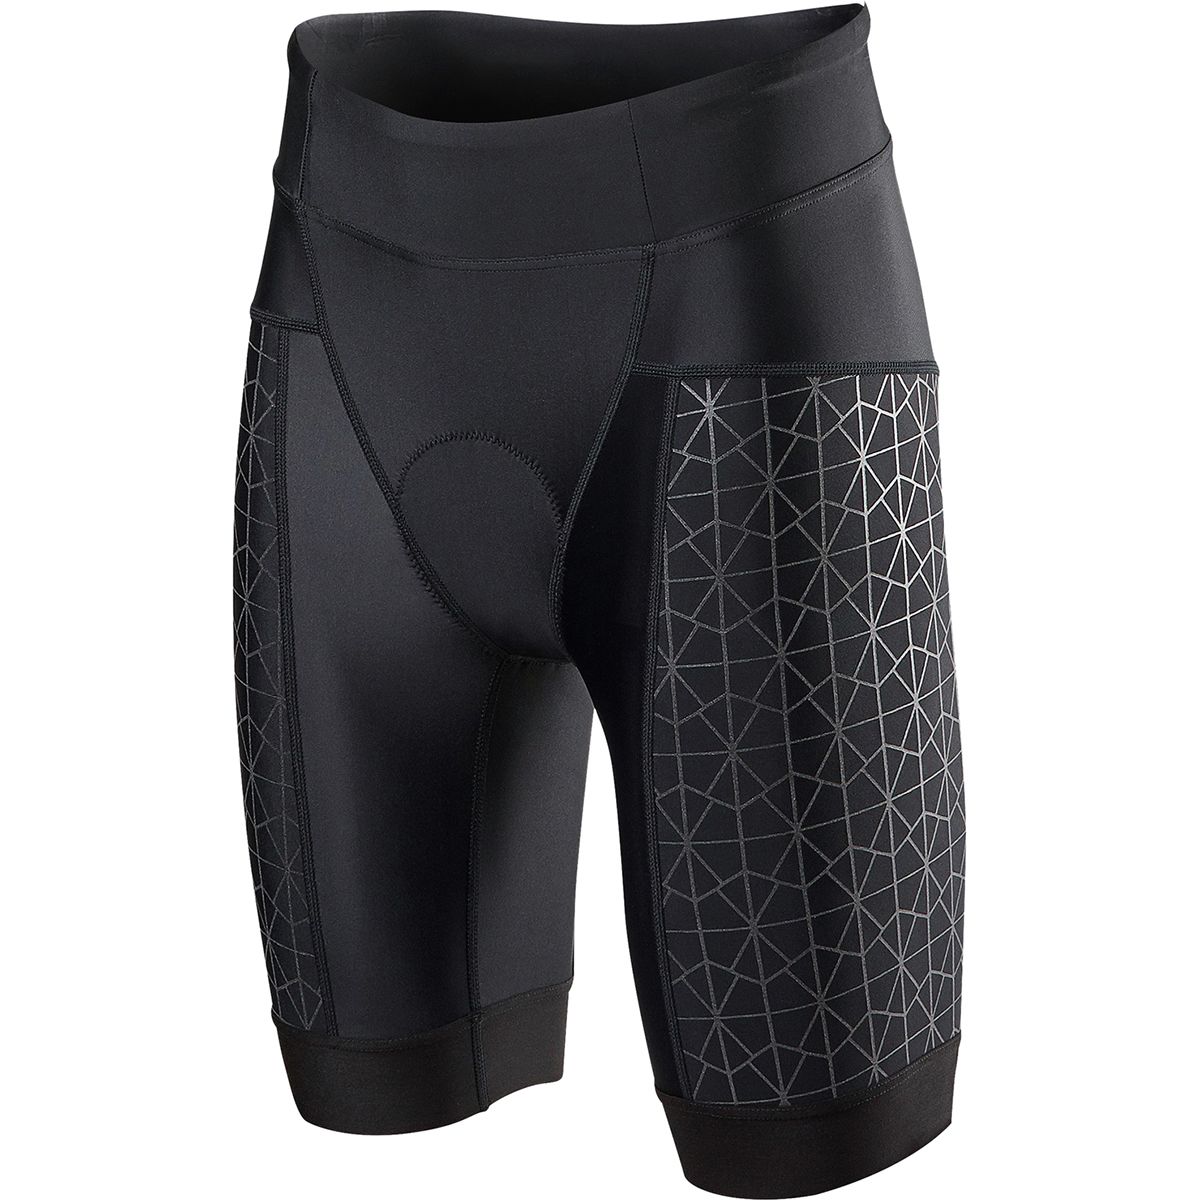 TYR Competitor 8in Tri Short - Women's